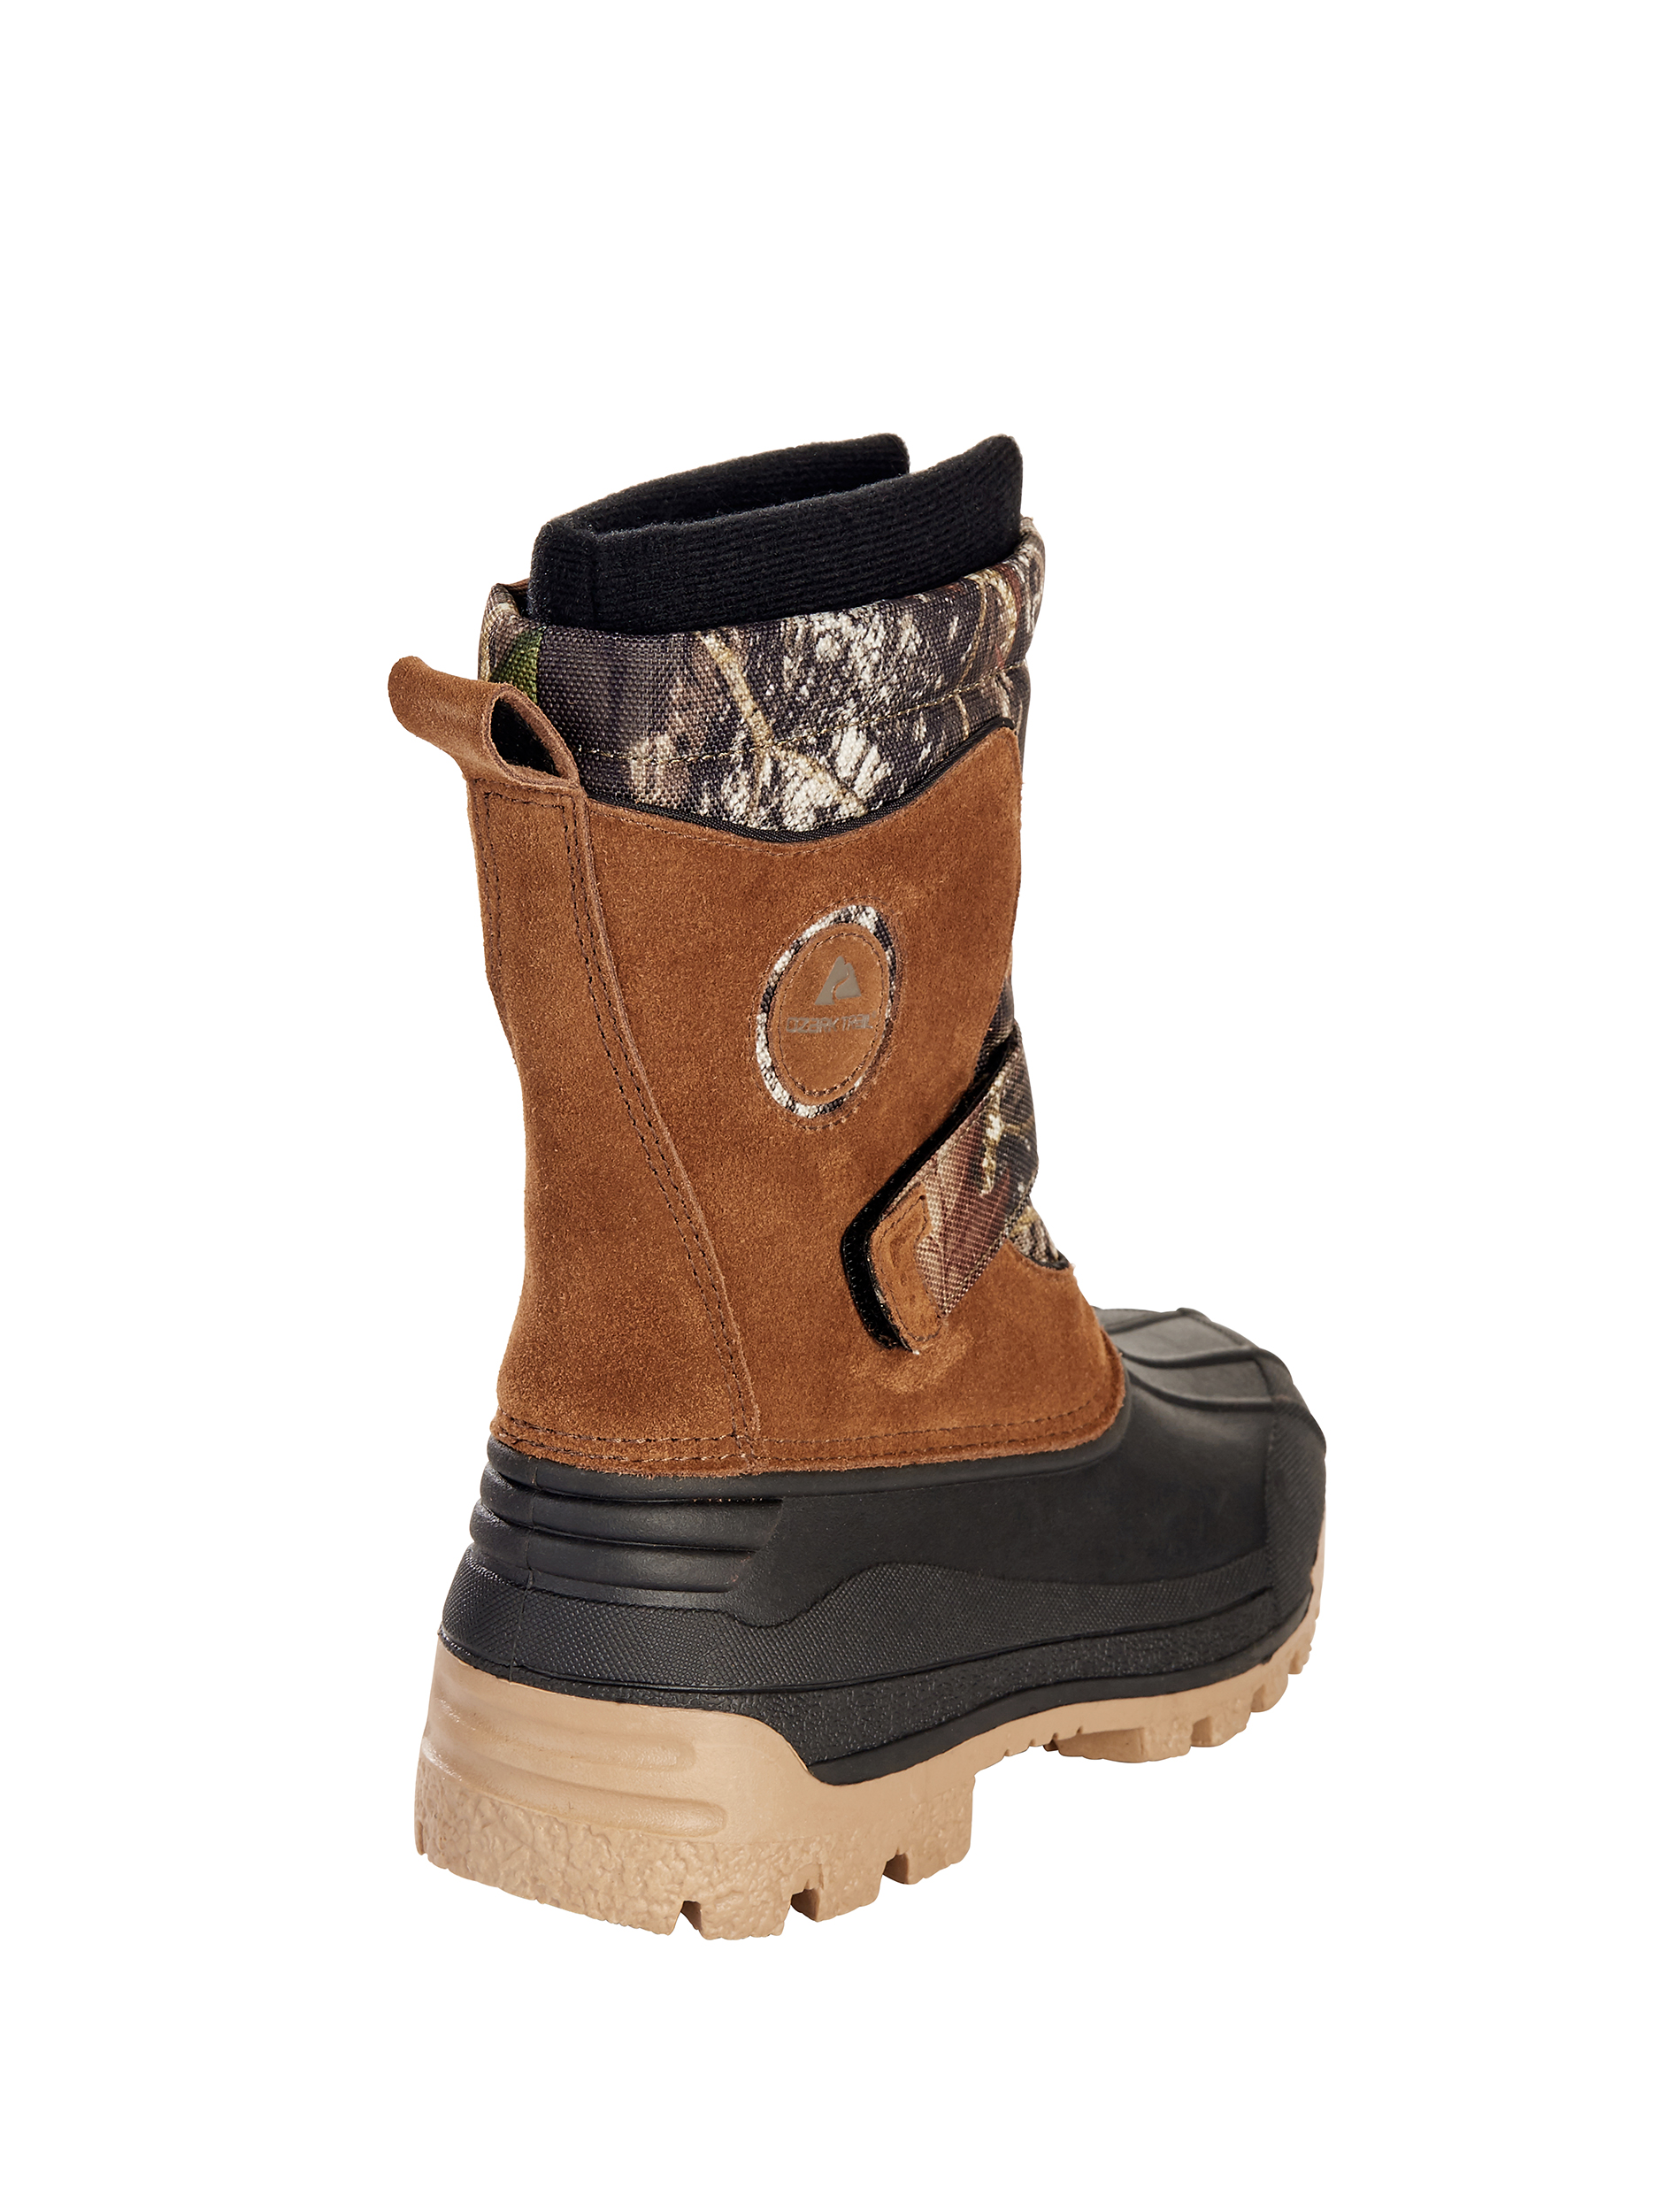 Ozark Trail Toddler Boys Temp Rated Camo Winter Boot - image 5 of 6